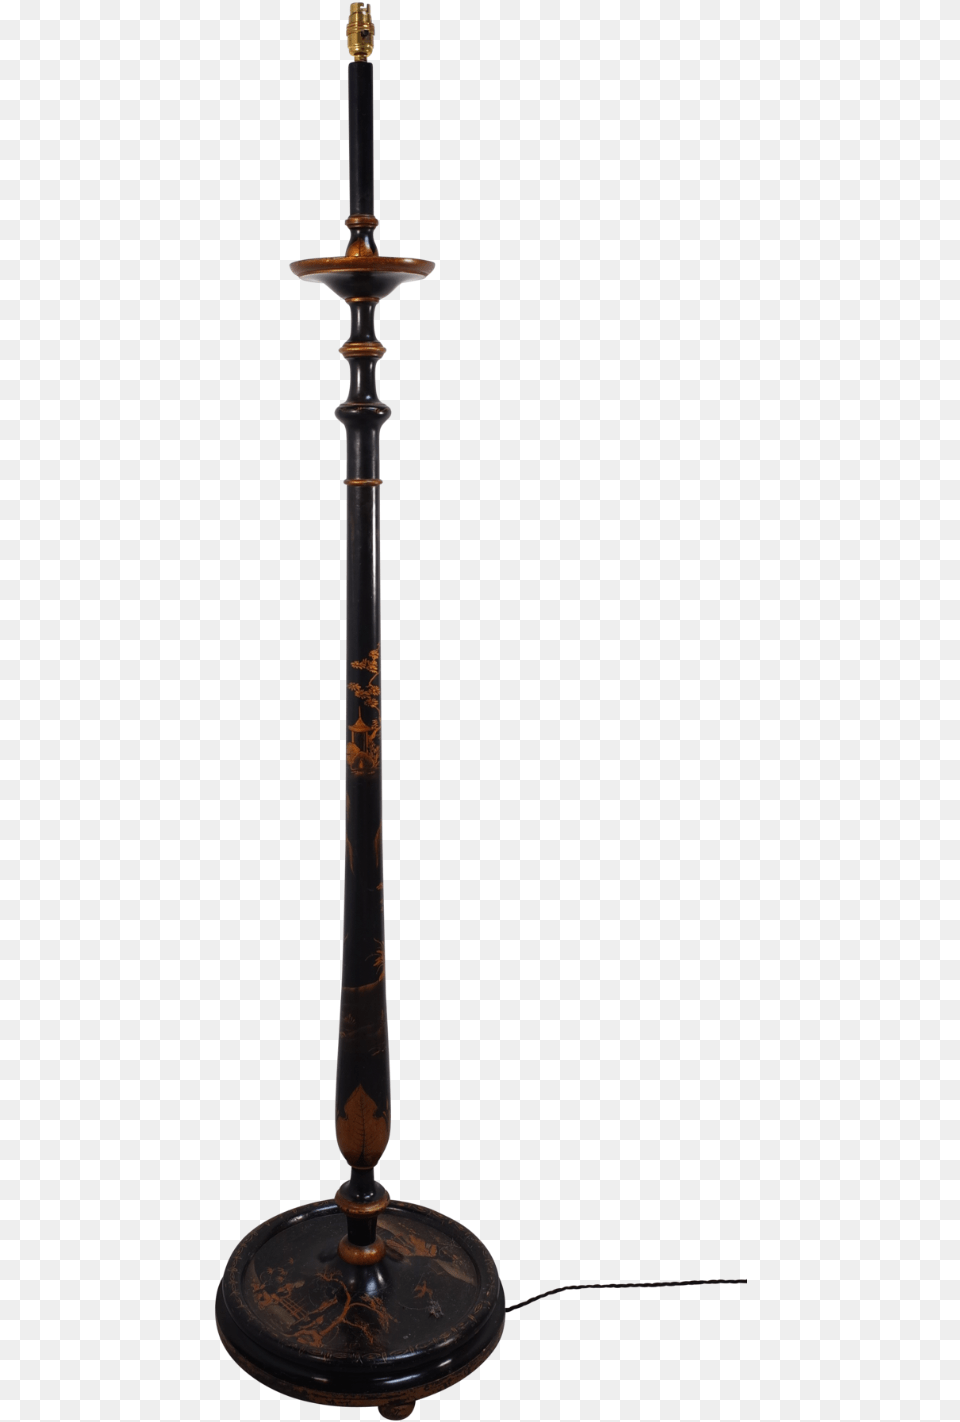 Chinoiserie Lacquered Floor Lamp Indian Musical Instruments, Candle, Mace Club, Weapon, Candlestick Free Png Download